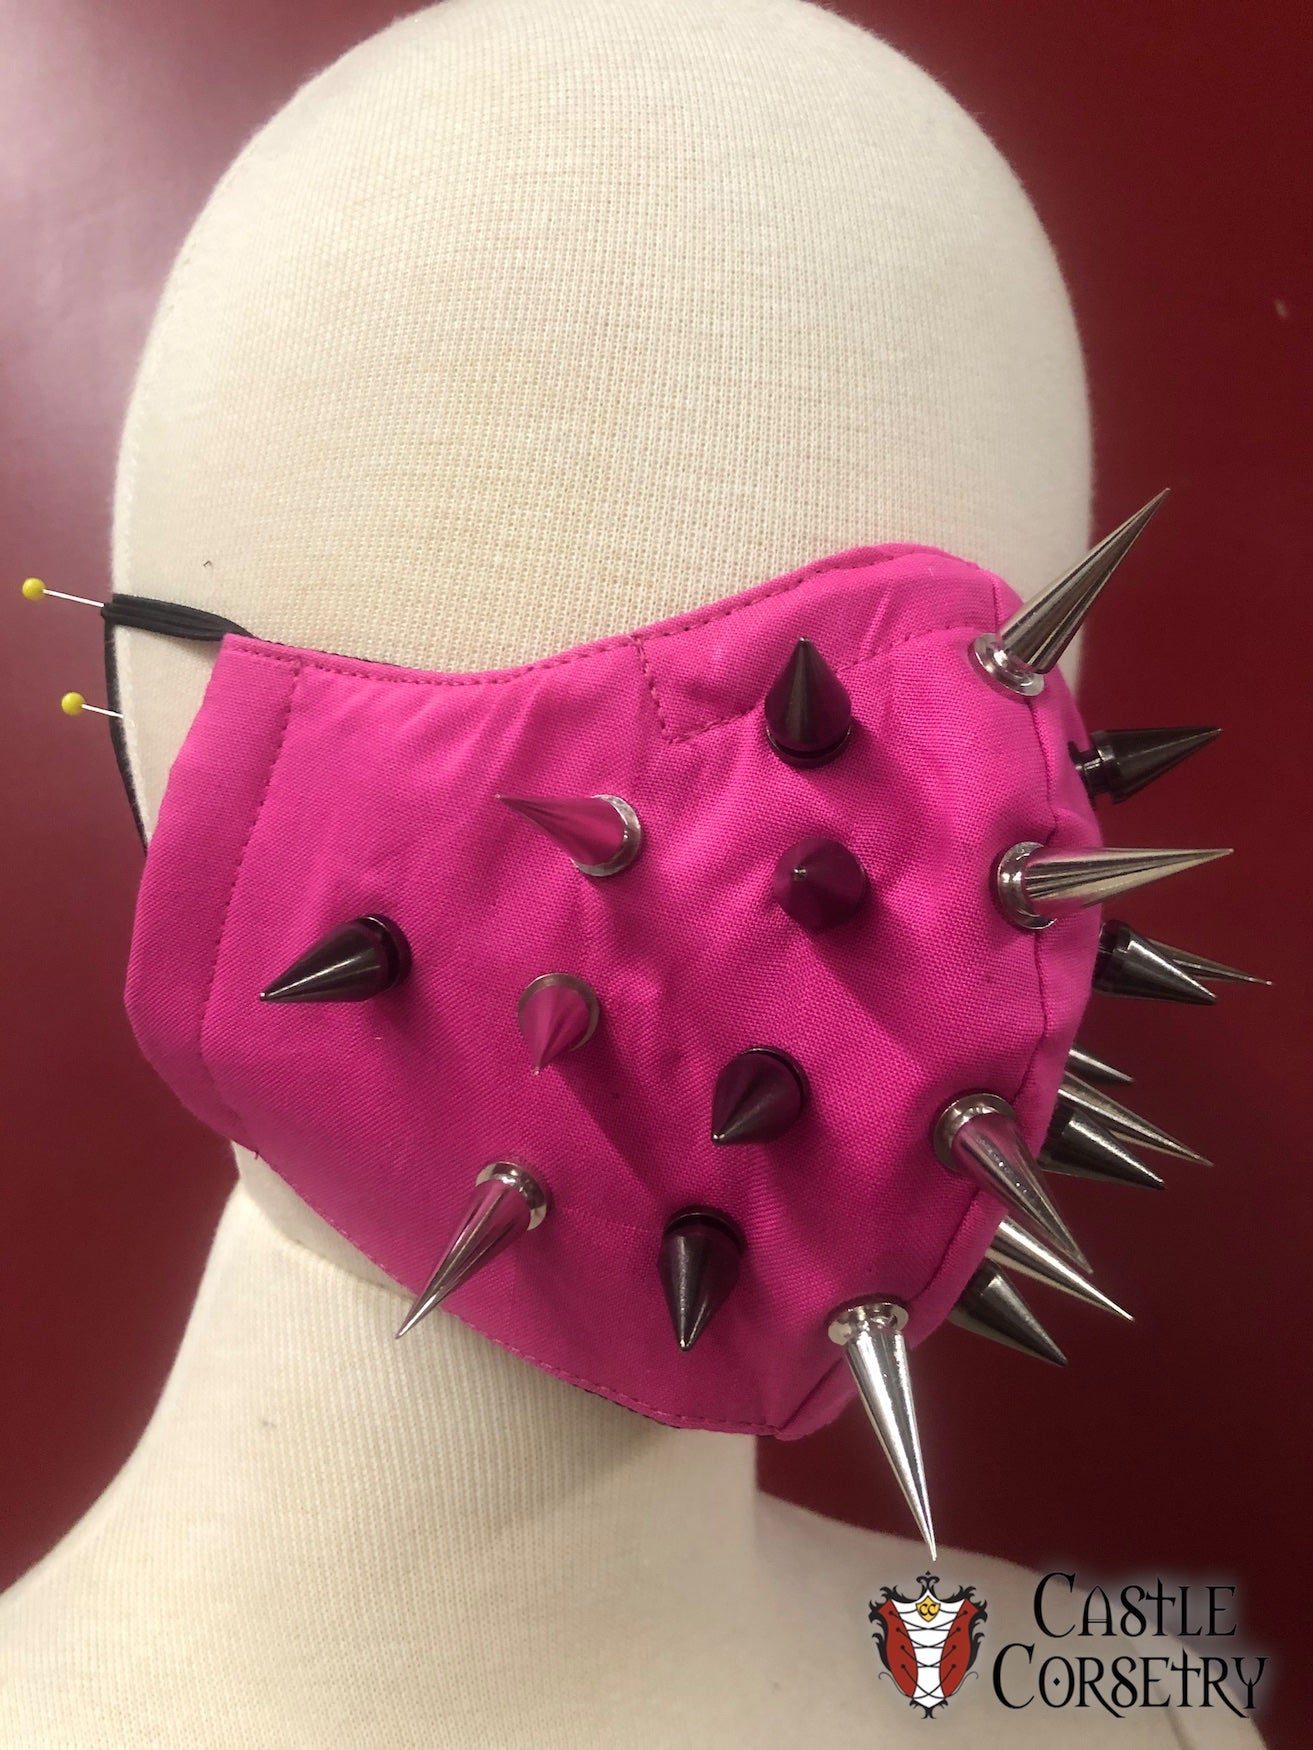 Hot Pink Spiked 'Face Mace' Mask